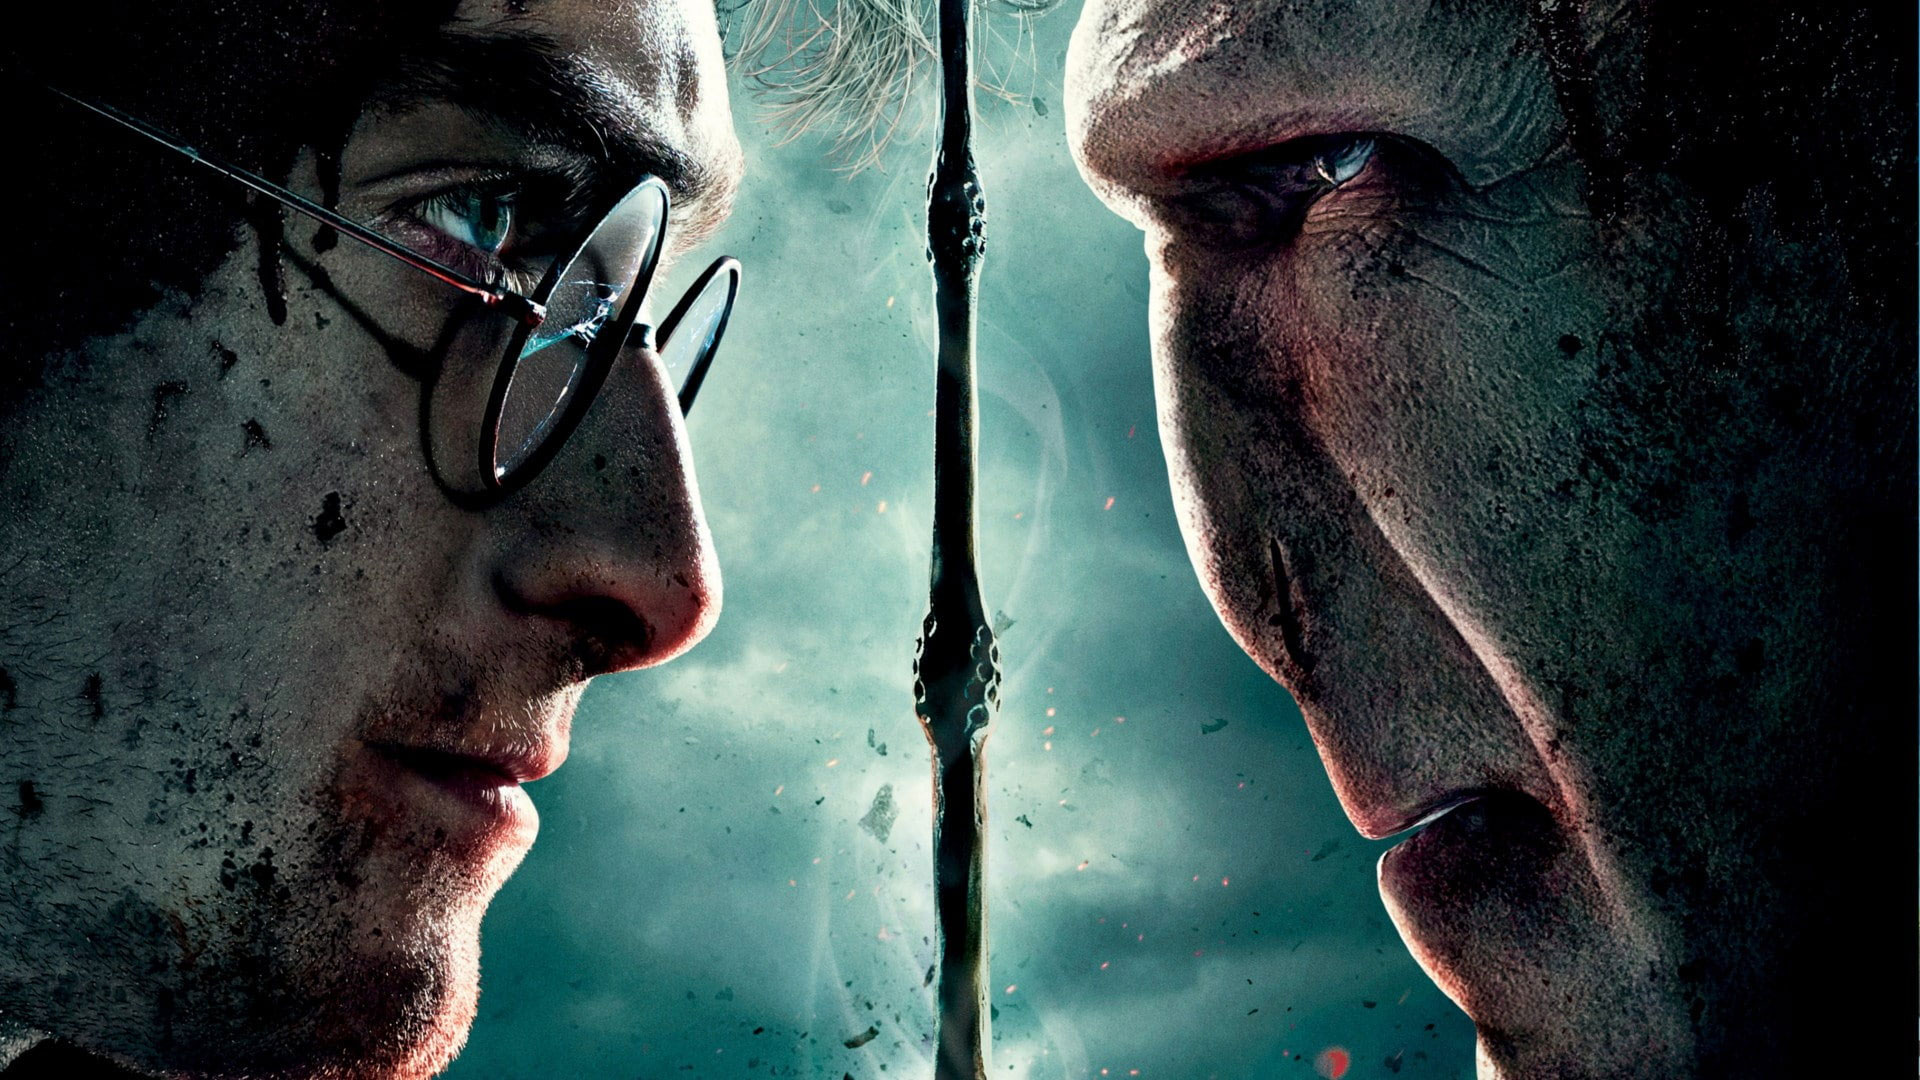 Wallpaper Harry Potter And The Deathly Hallows Part 2